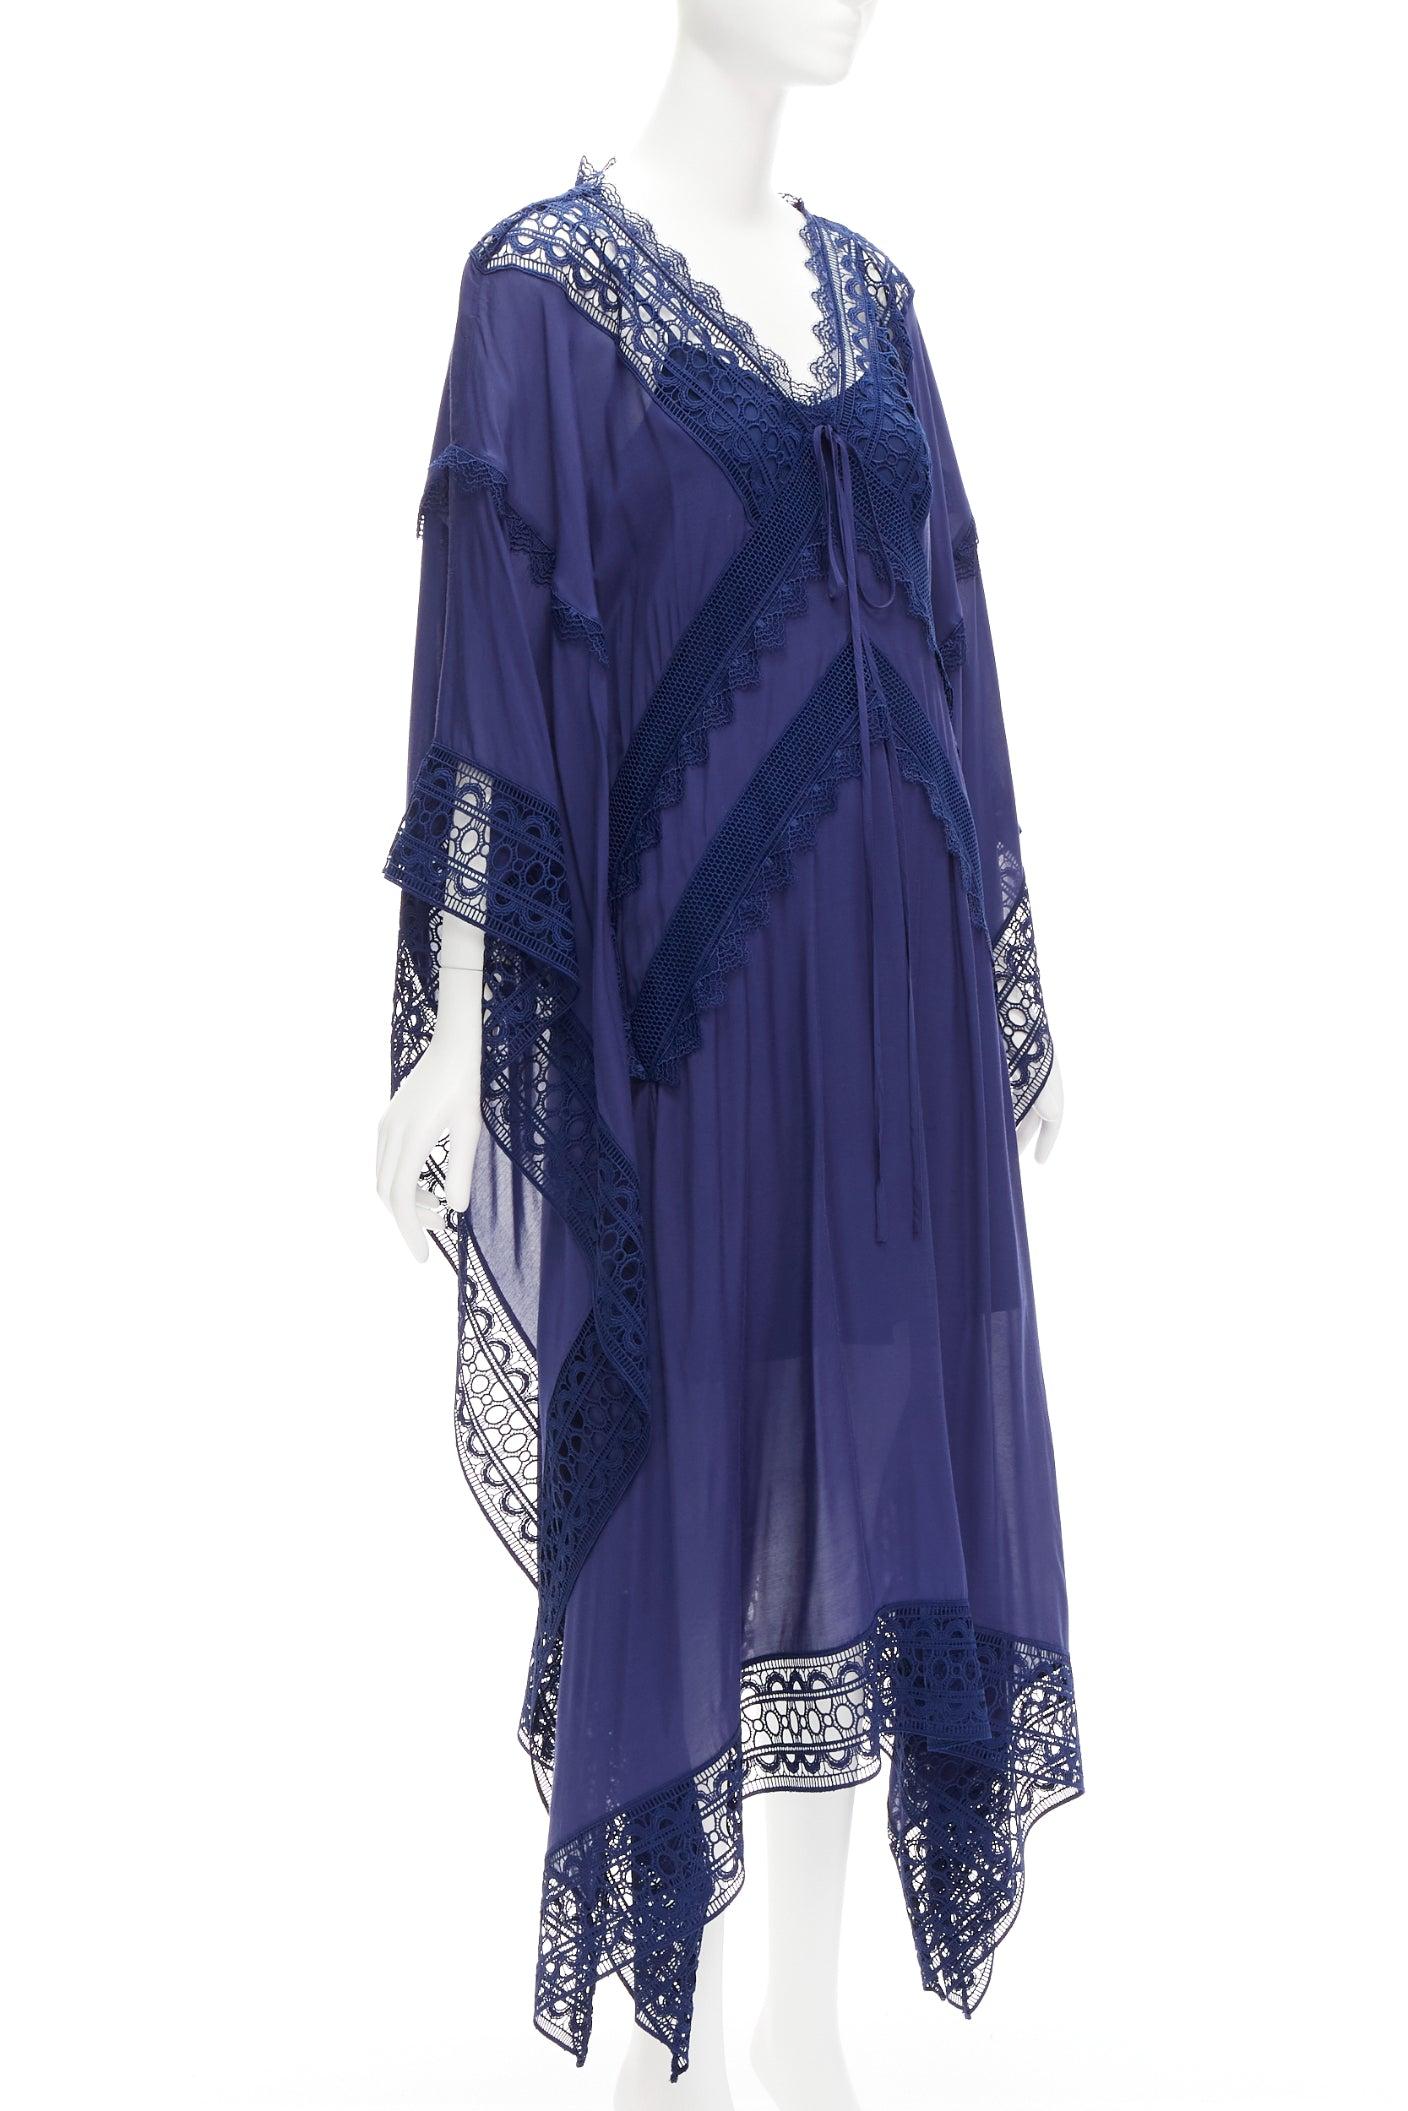 SELF PORTRAIT blue embroidery anglais tie front midi kaftan dress UK8 S
Reference: JACG/A00137
Brand: Self Portrait
Material: Viscose
Color: Navy
Pattern: Solid
Closure: Slip On
Lining: Navy Polyester
Extra Details: Blue Blue Fabric Oversized Kaftan